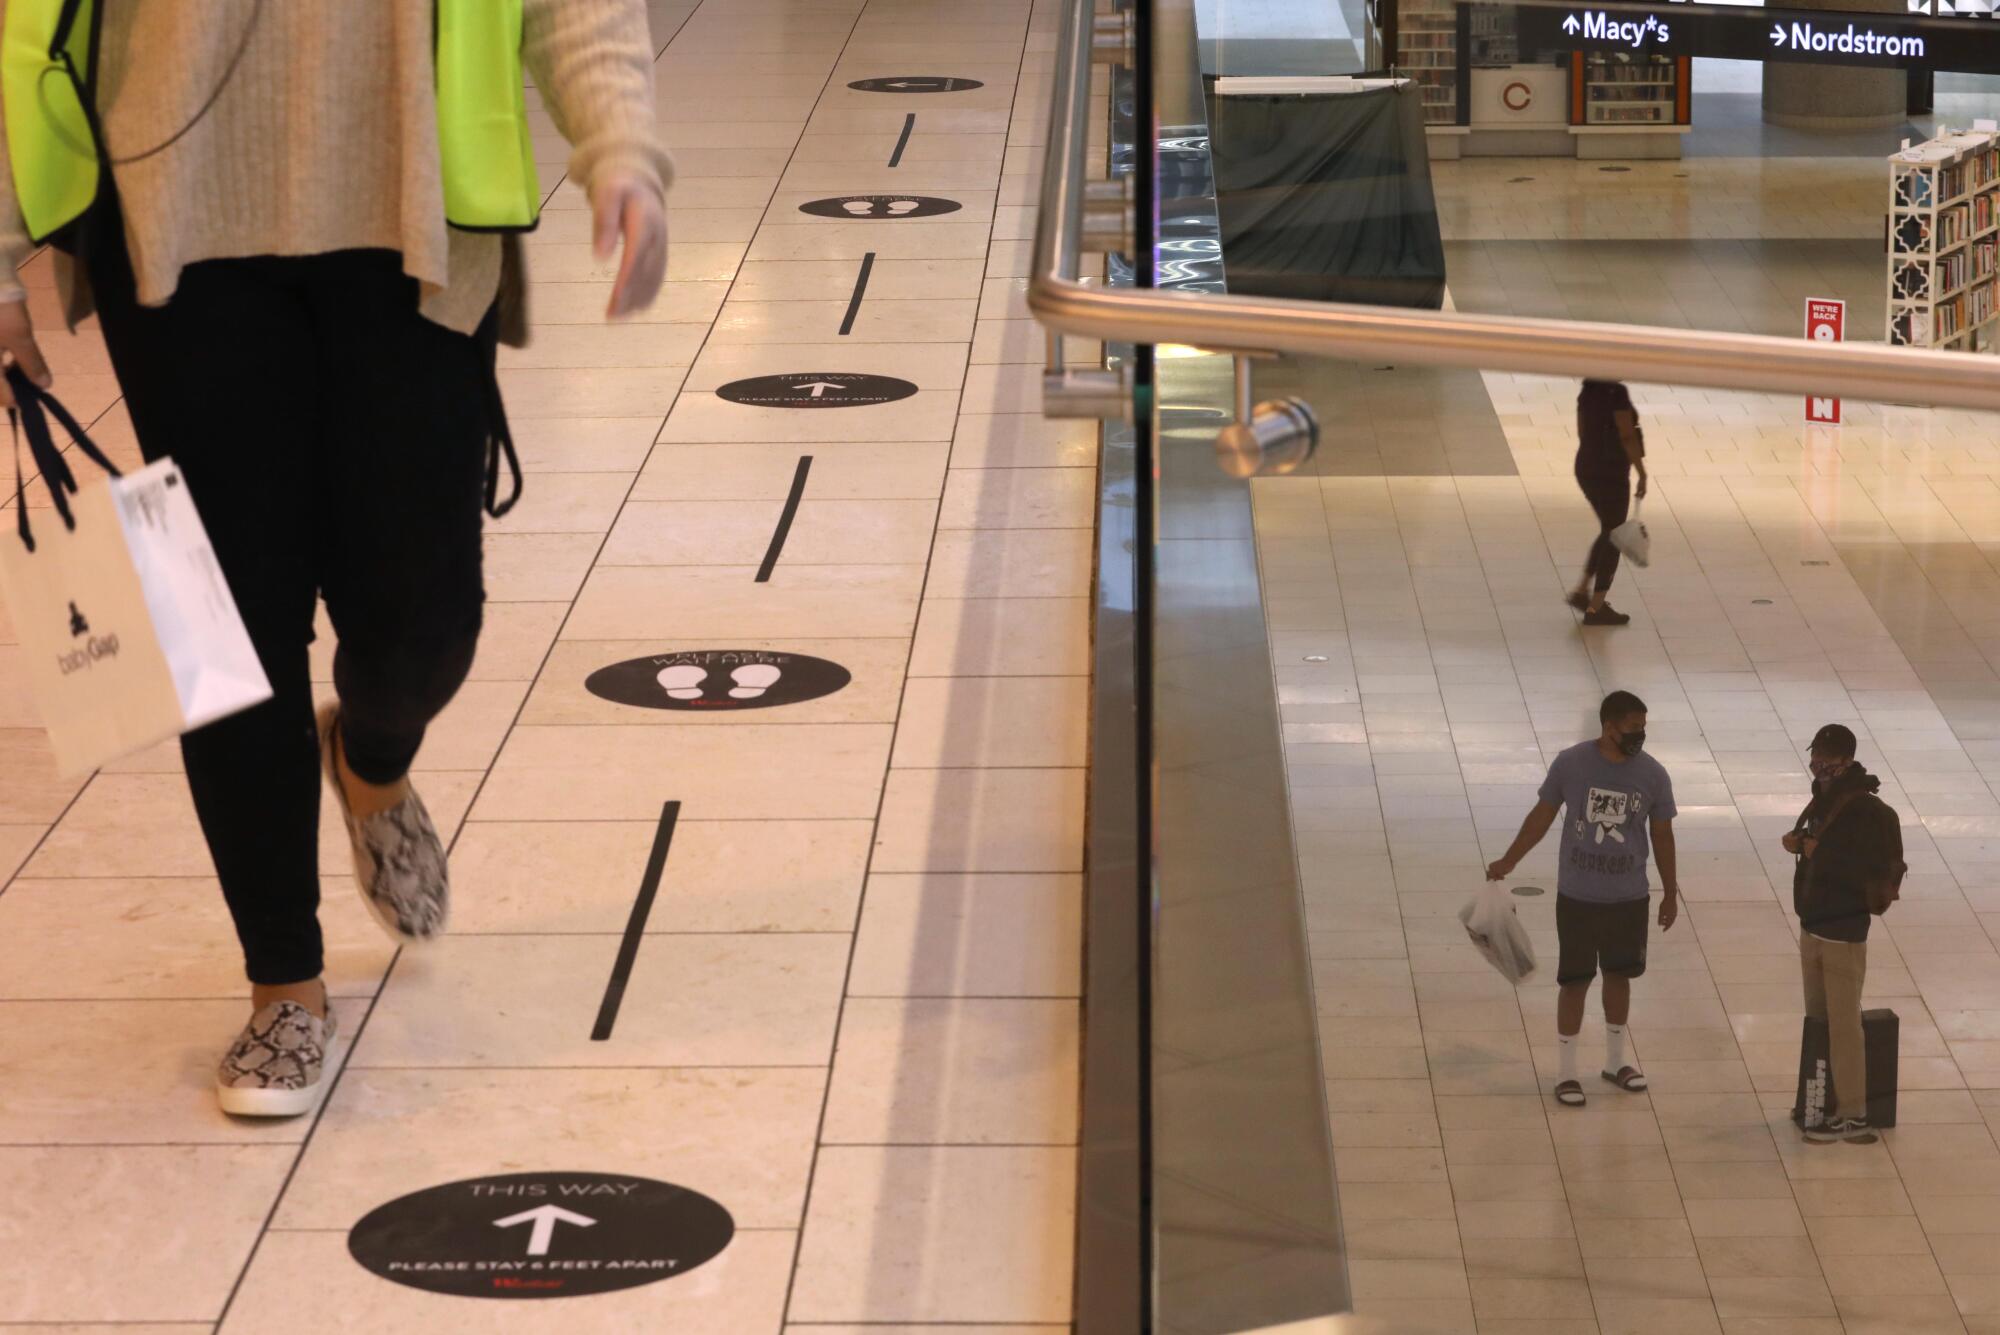 Floor signs with arrows and footprints are spaced several feet apart to encourage social distancing.